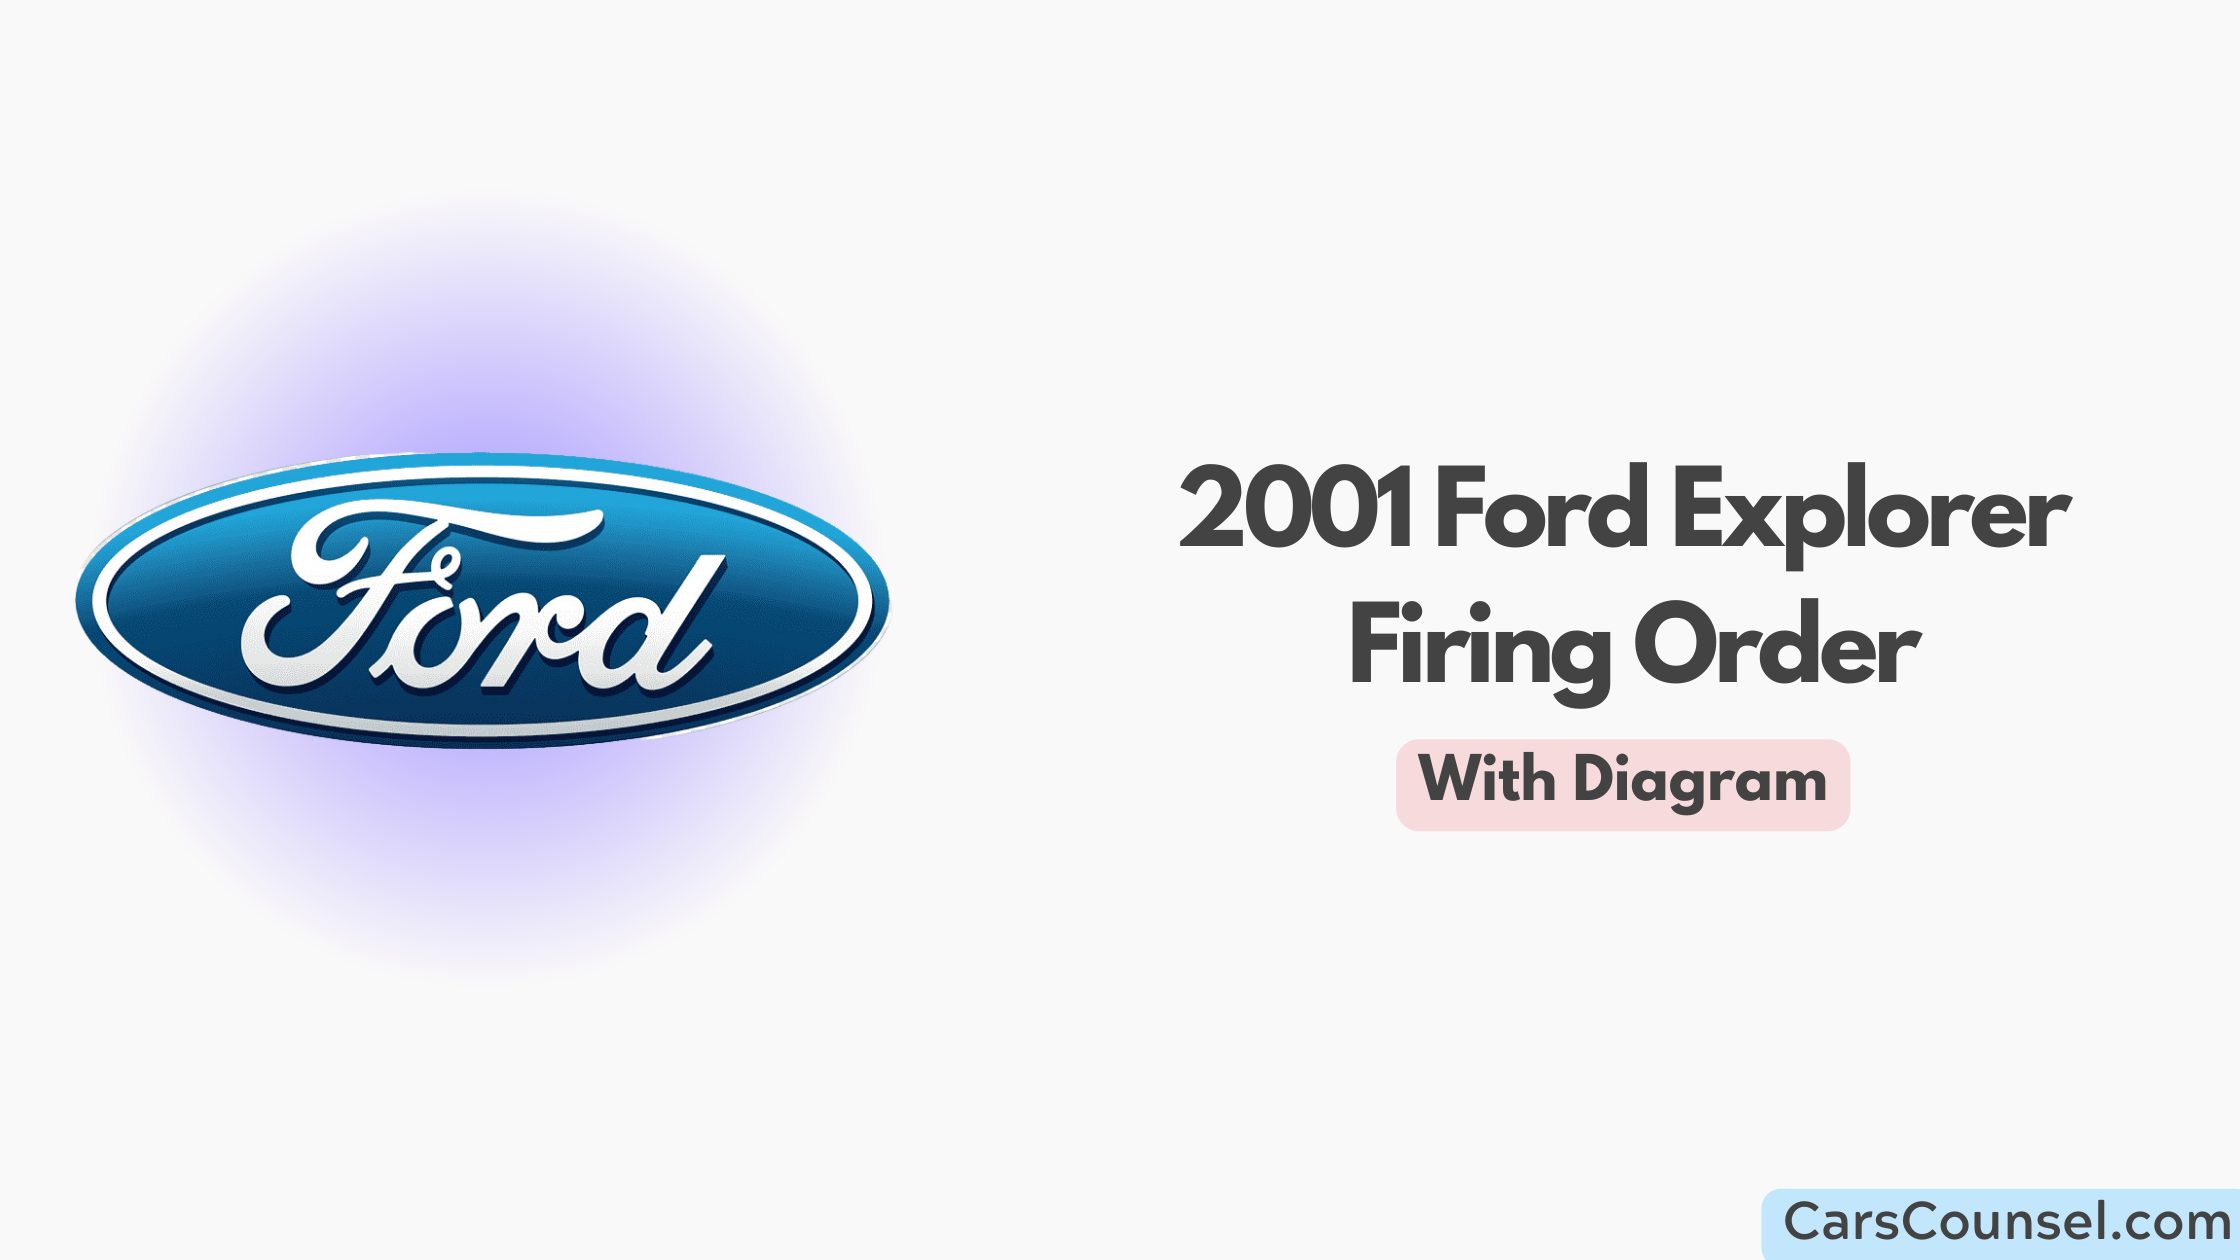 2001 Ford Explorer Firing Order With Diagram